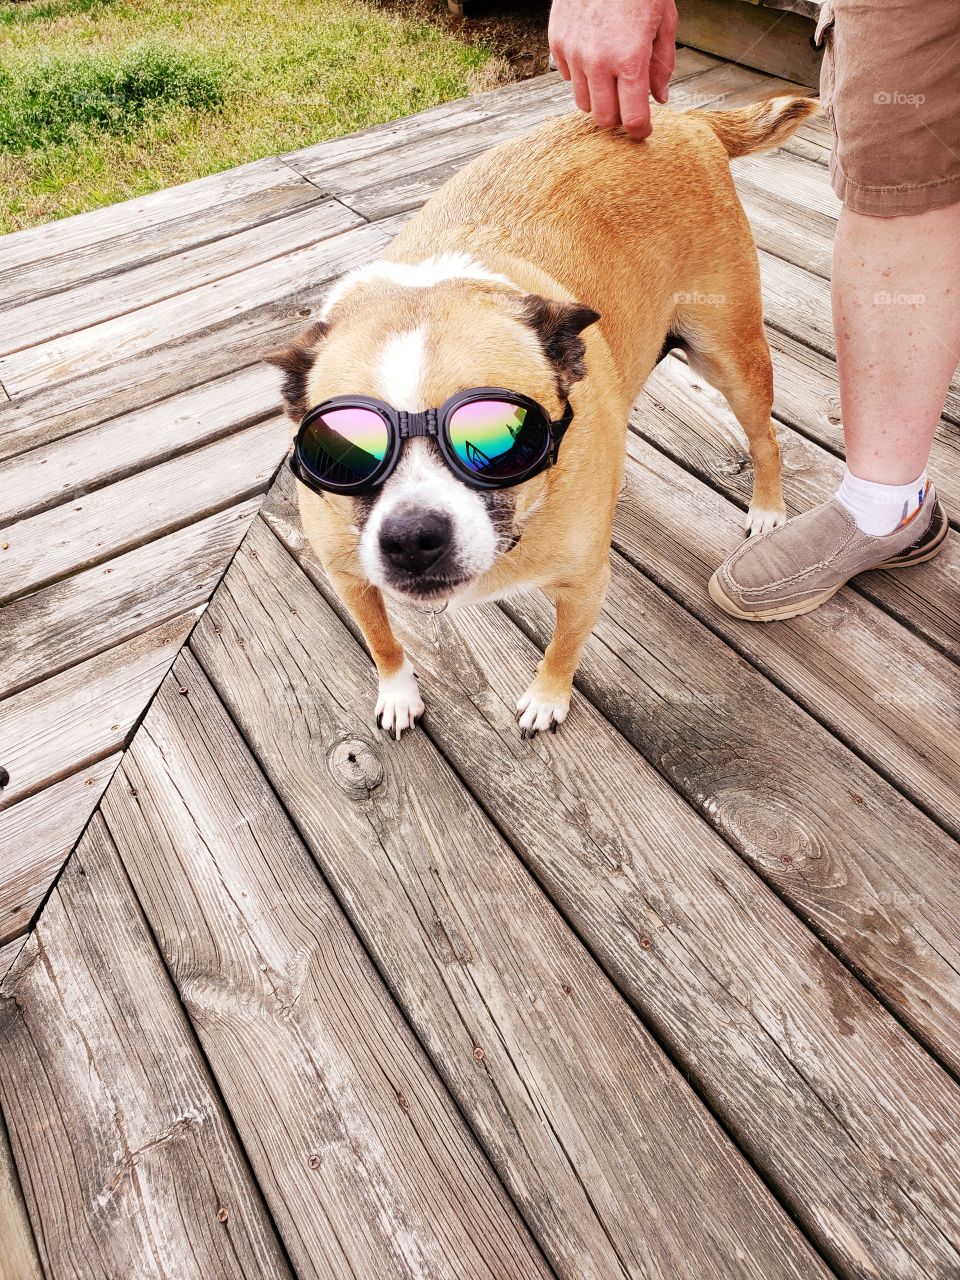 Our handsome dog with his new shades!